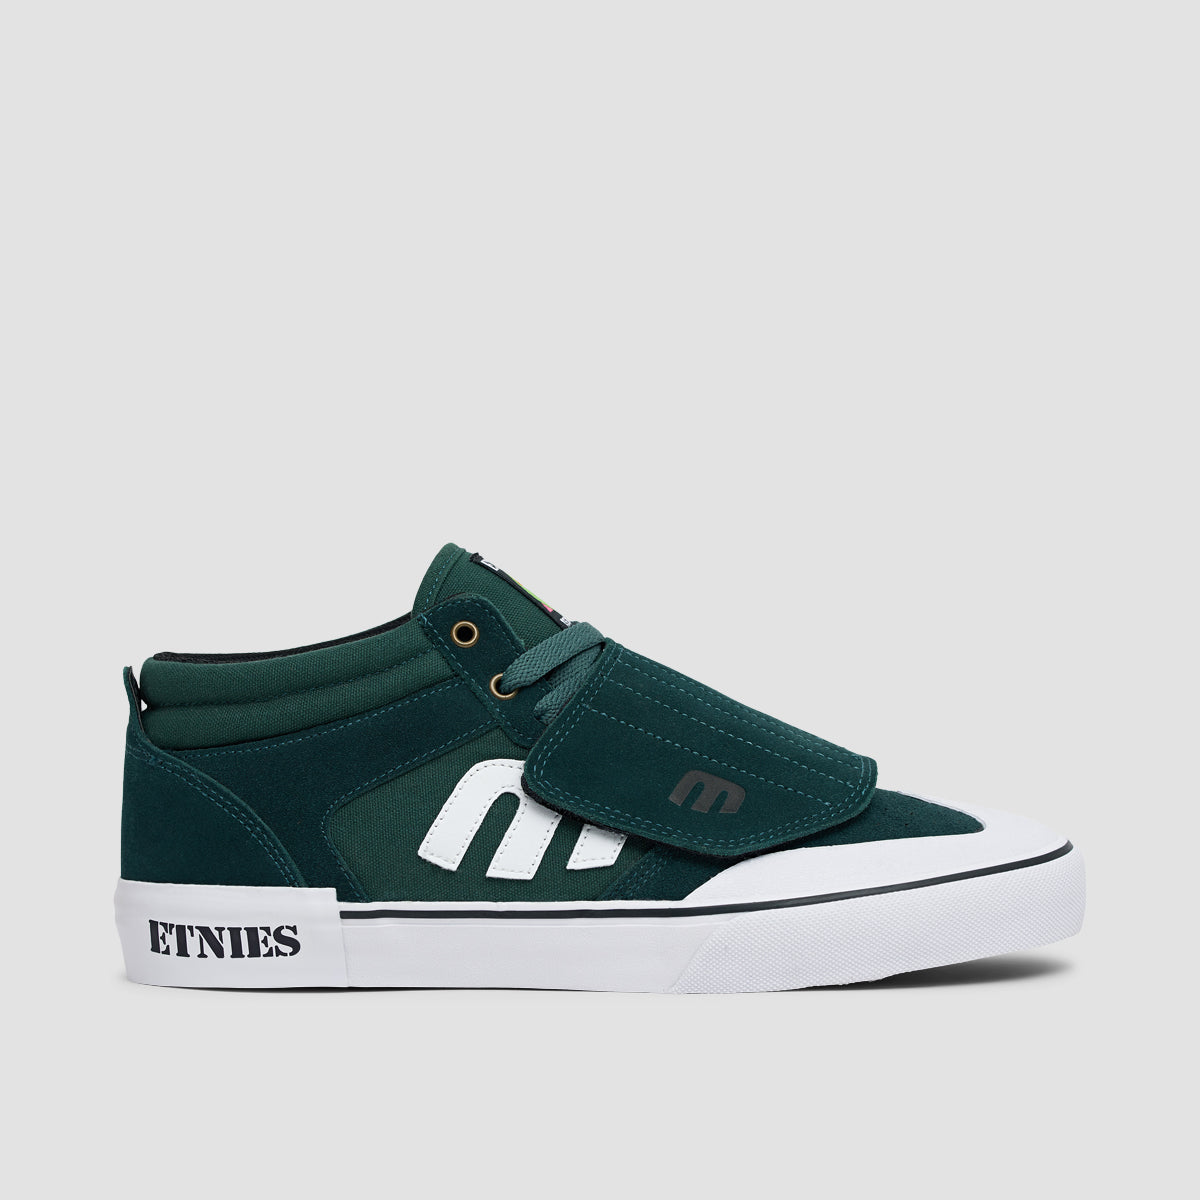 Etnies Windrow Vulc Mid Andy Anderson Shoes - Green/White